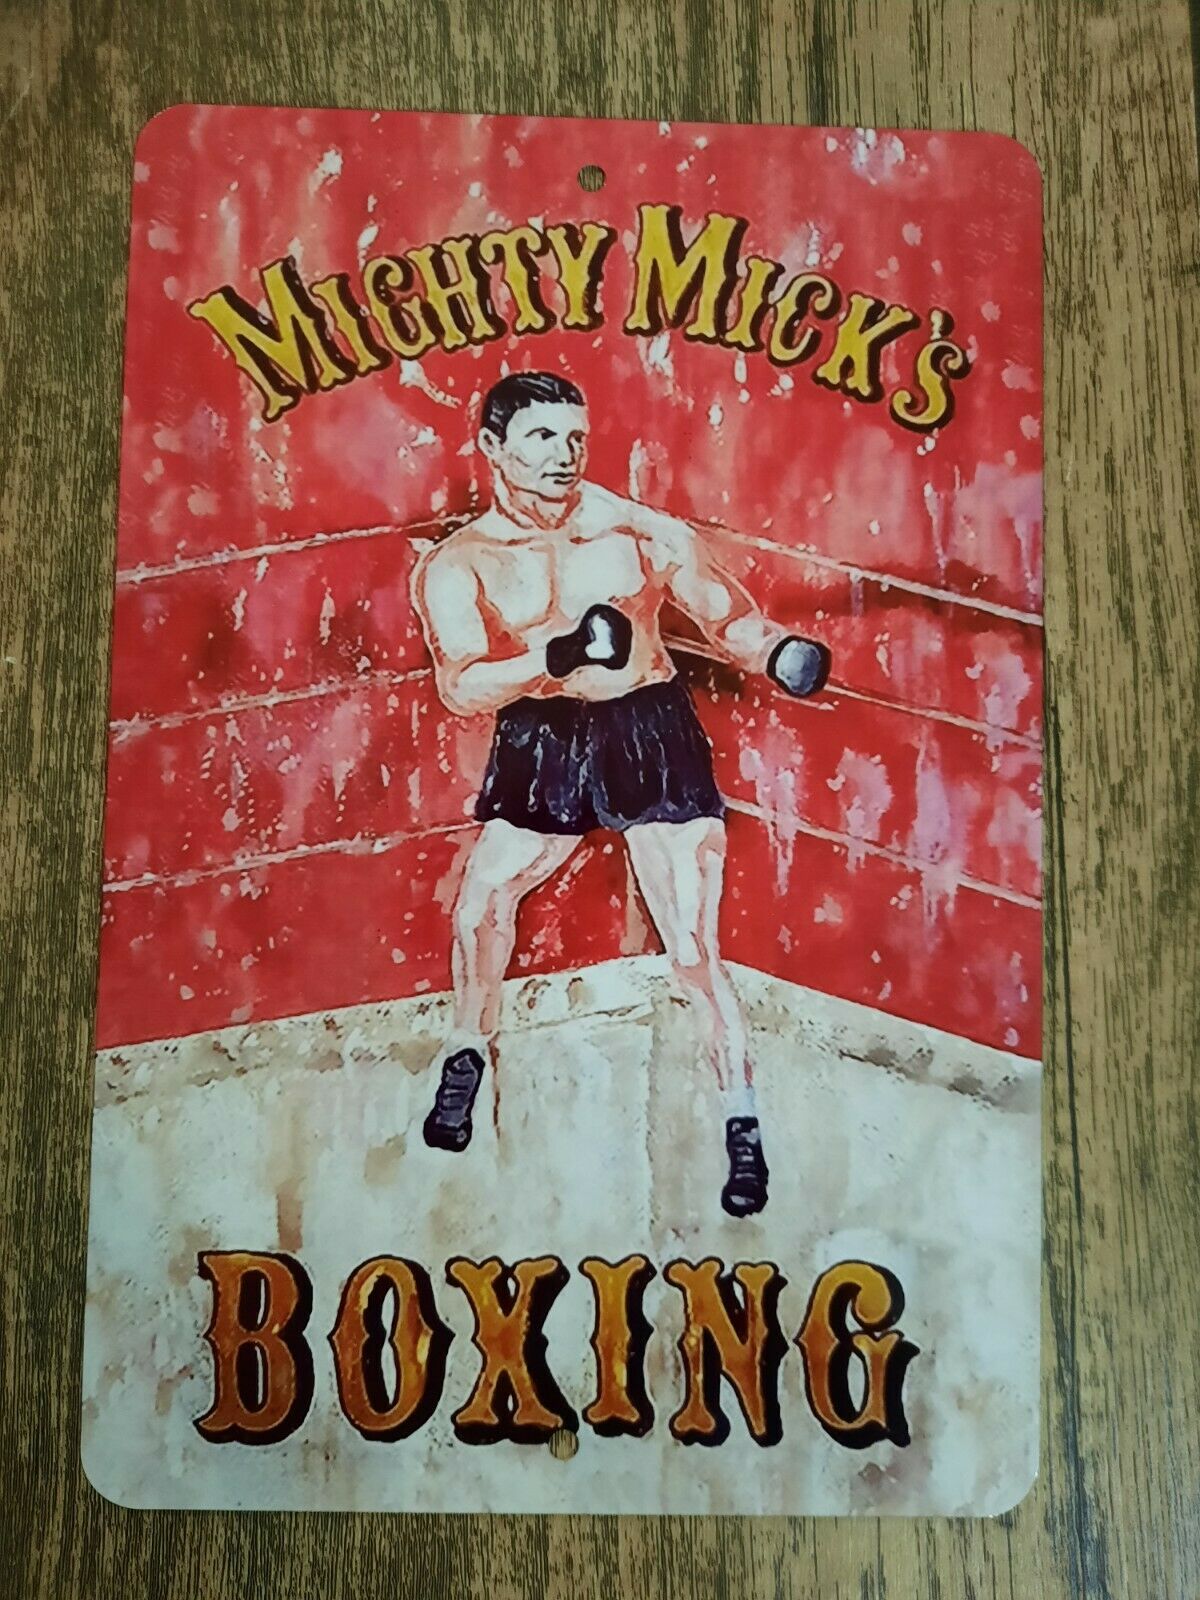 Mighty Micks Boxing 8x12 Metal Wall Sign Garage Man Cave Rocky Boxing Movie Poster